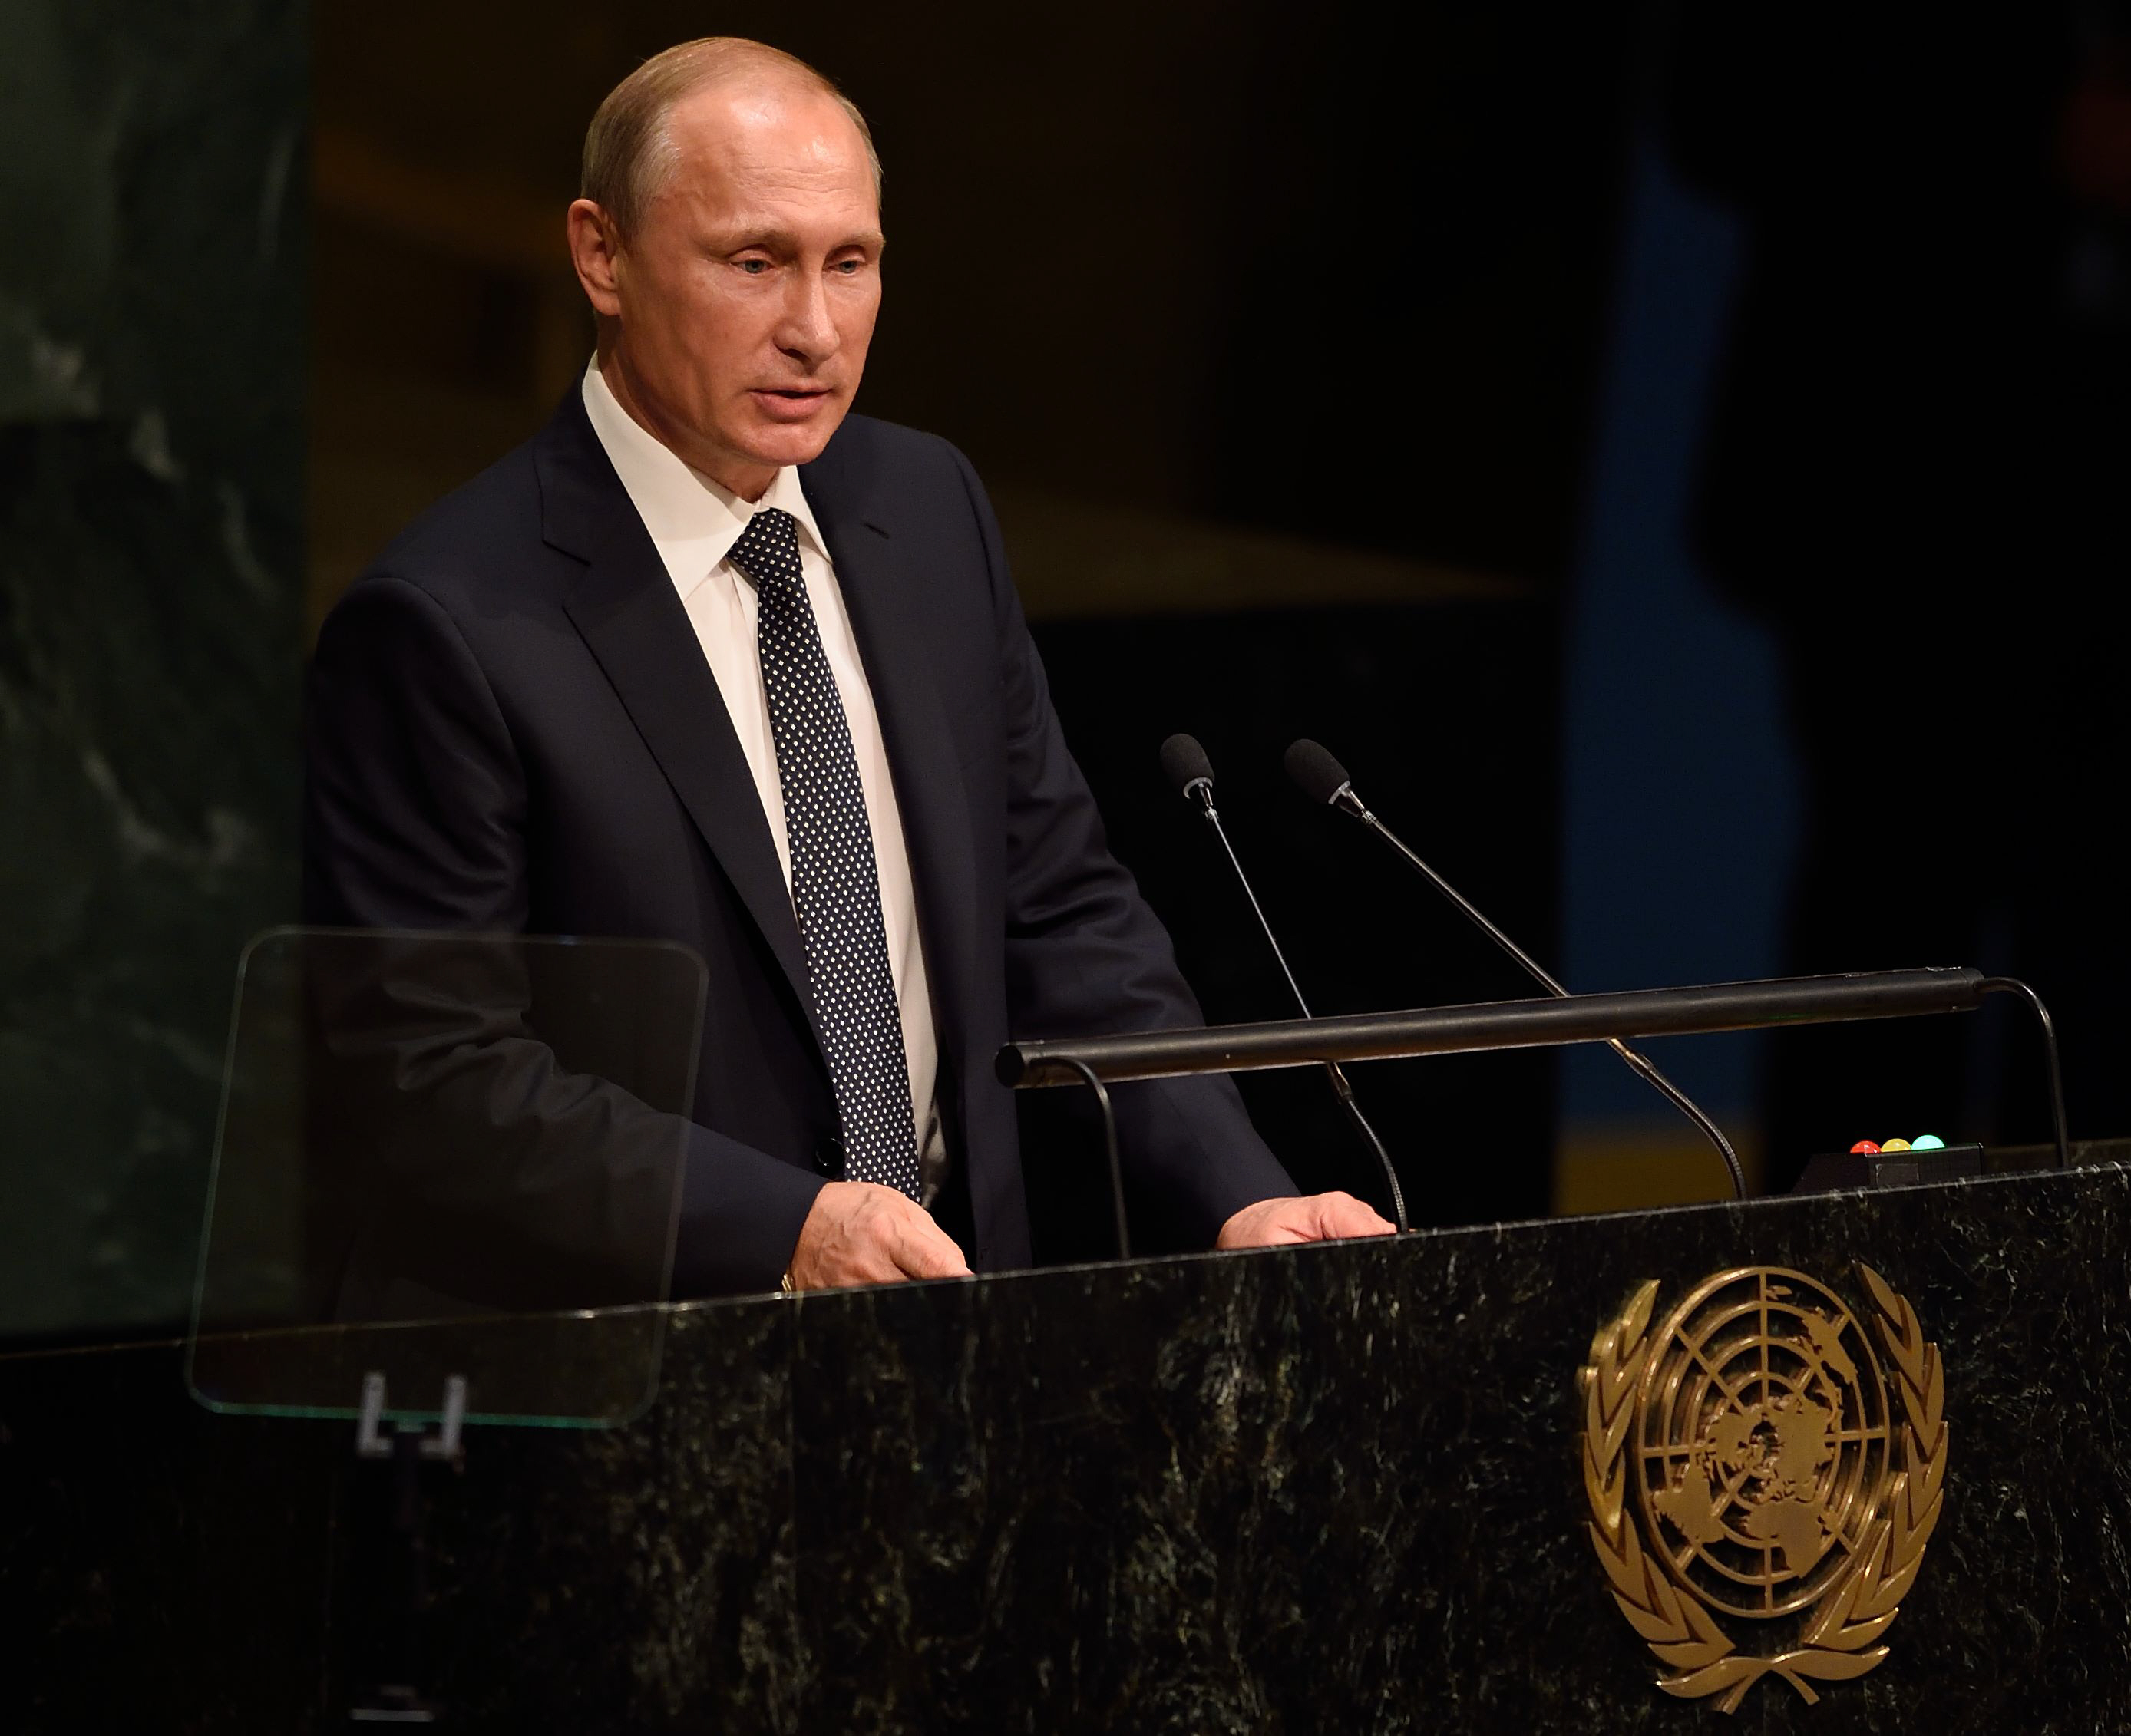 russia 039 s president vladimir putin addresses the 70th session of the united nations general assembly september 28 2015 at the united nations in new york afp photo